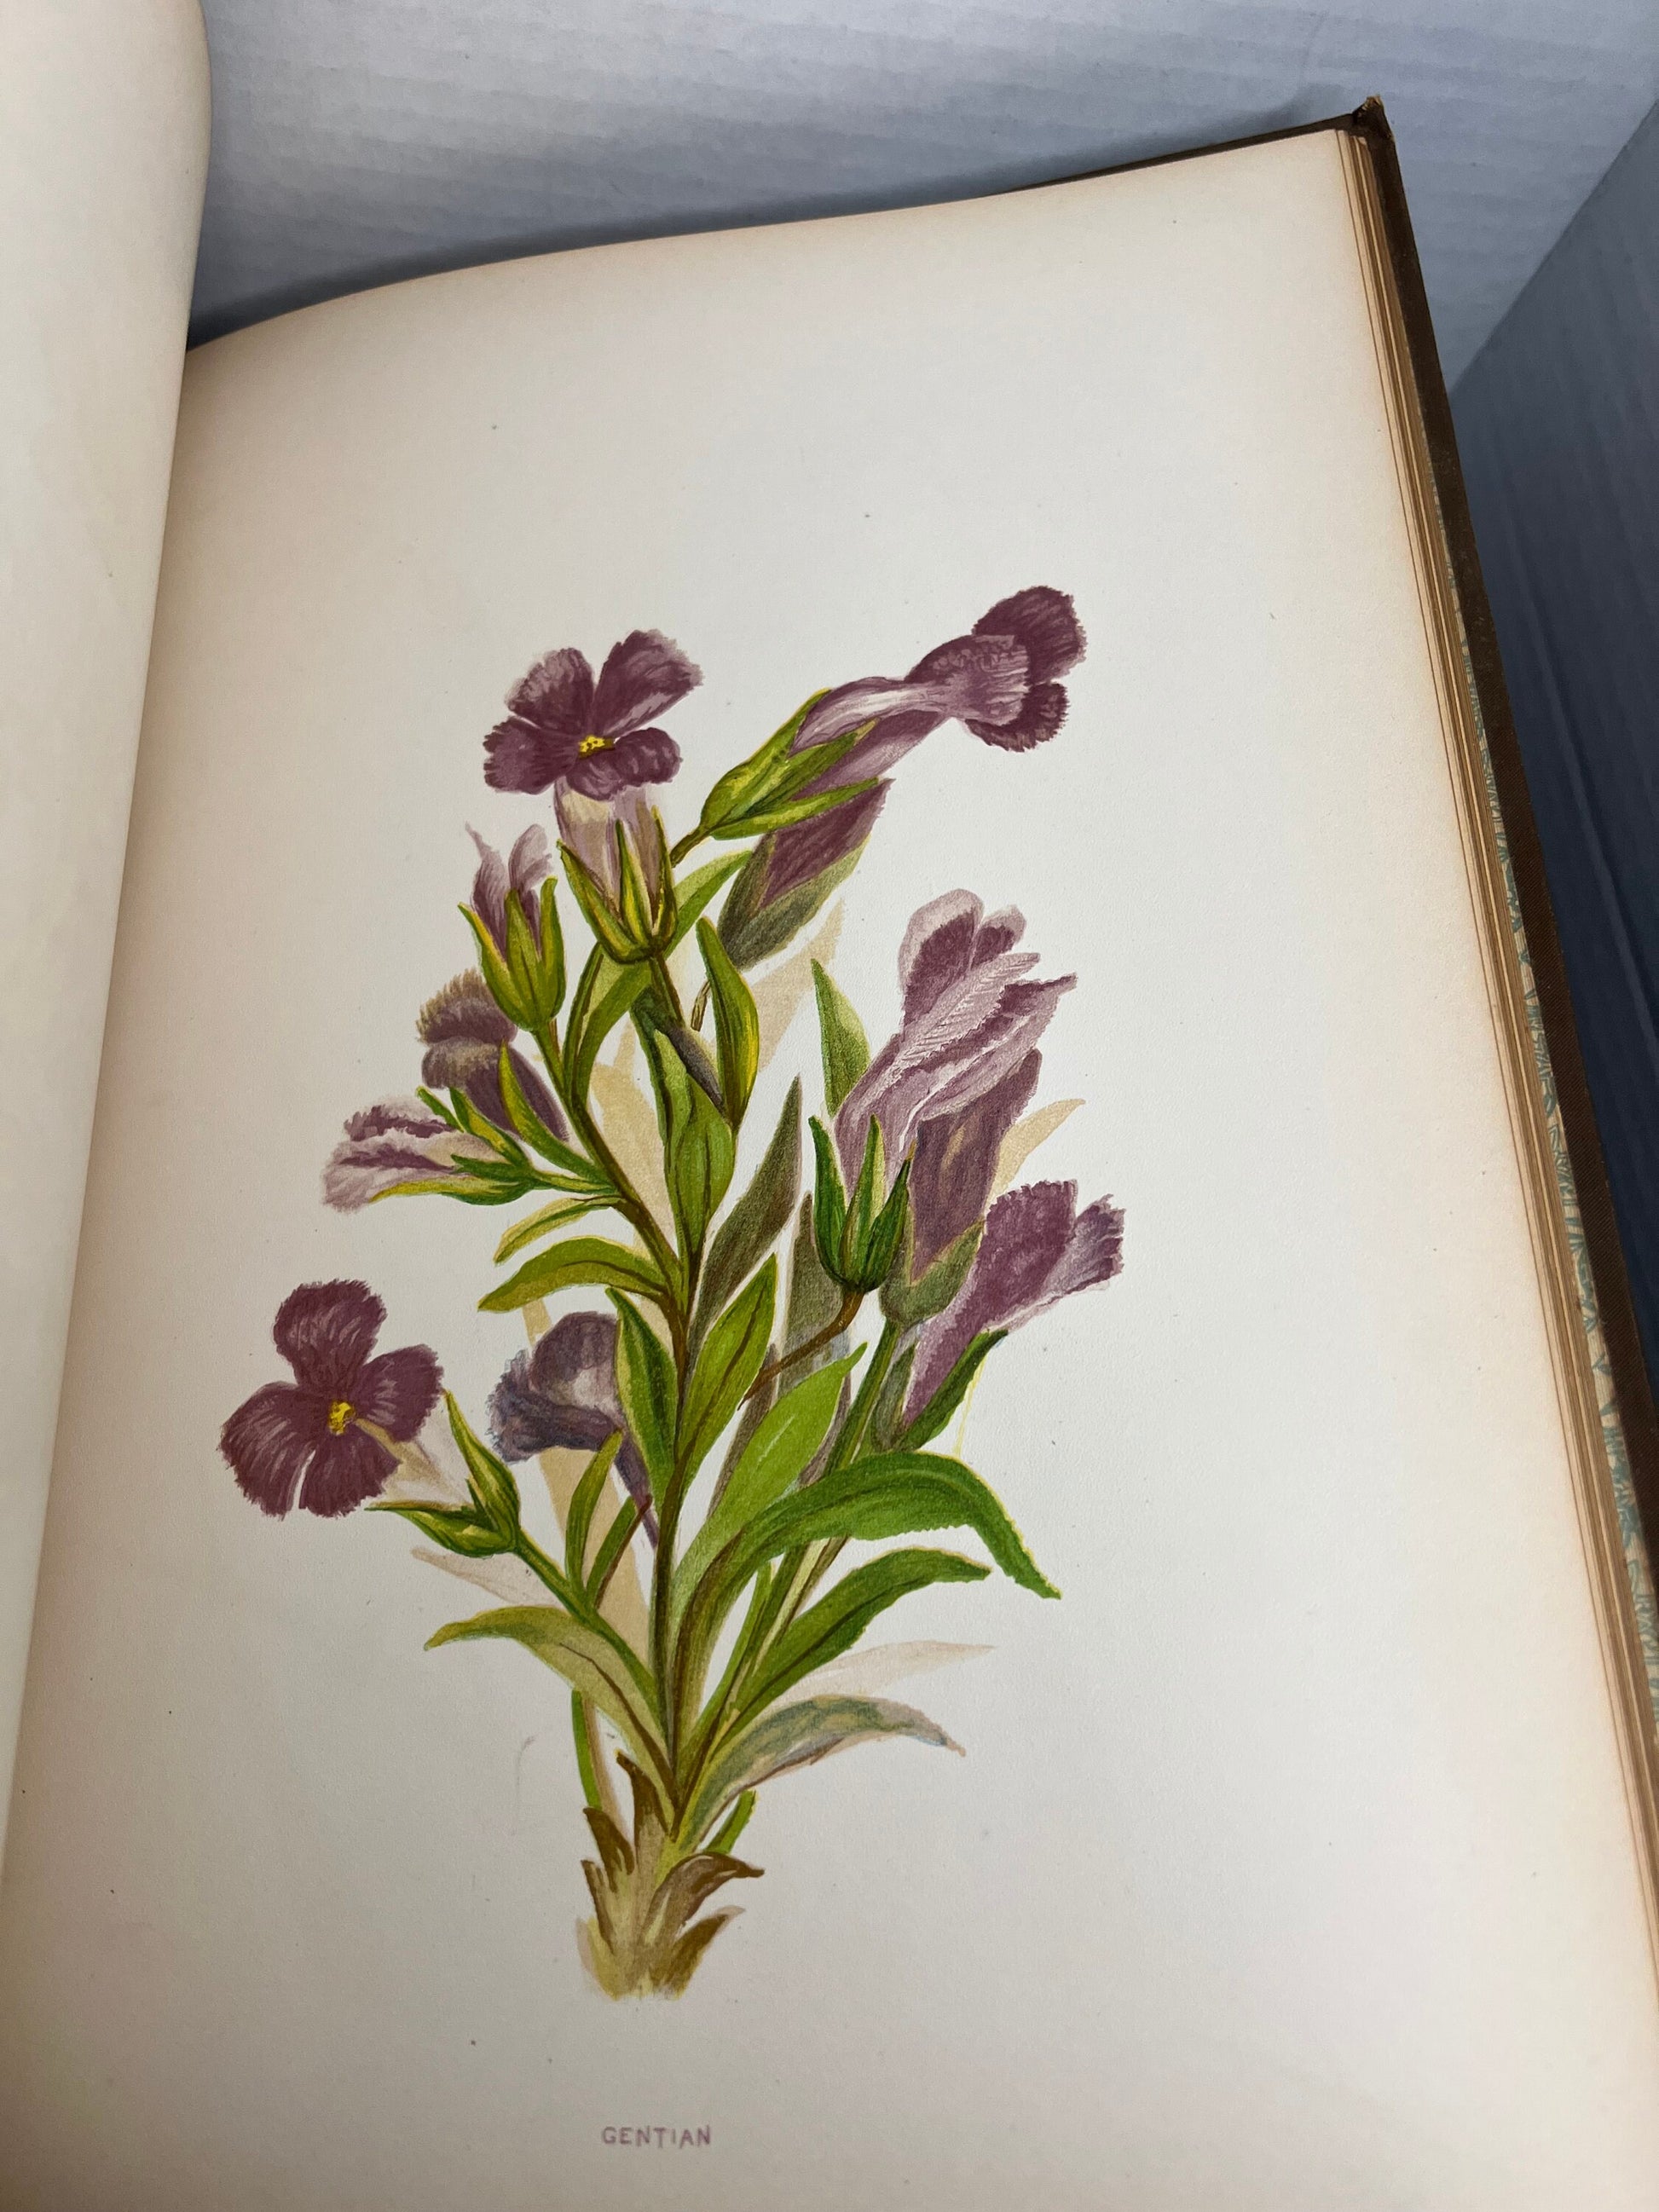 Antique Victorian floral book 1889 wild flowers of the Rocky Mountains 24 color plates